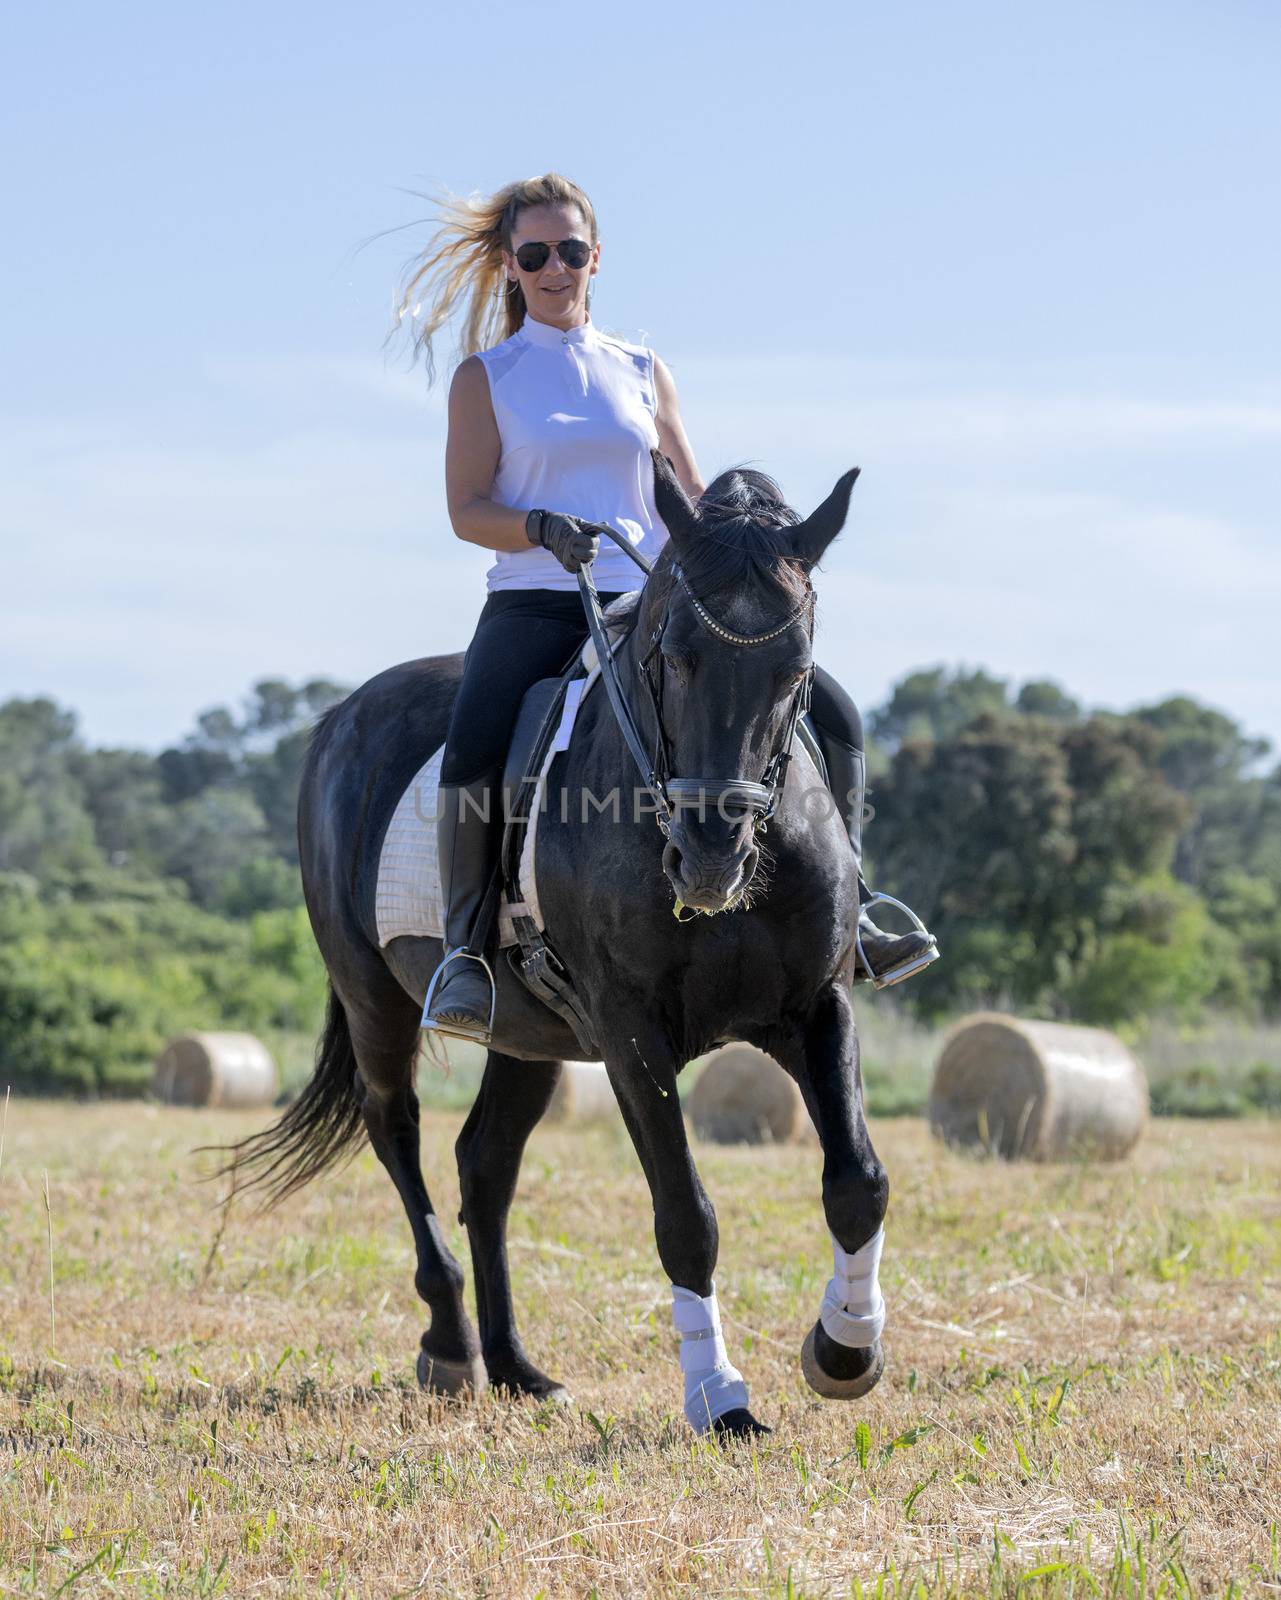  riding girl are training her black horse